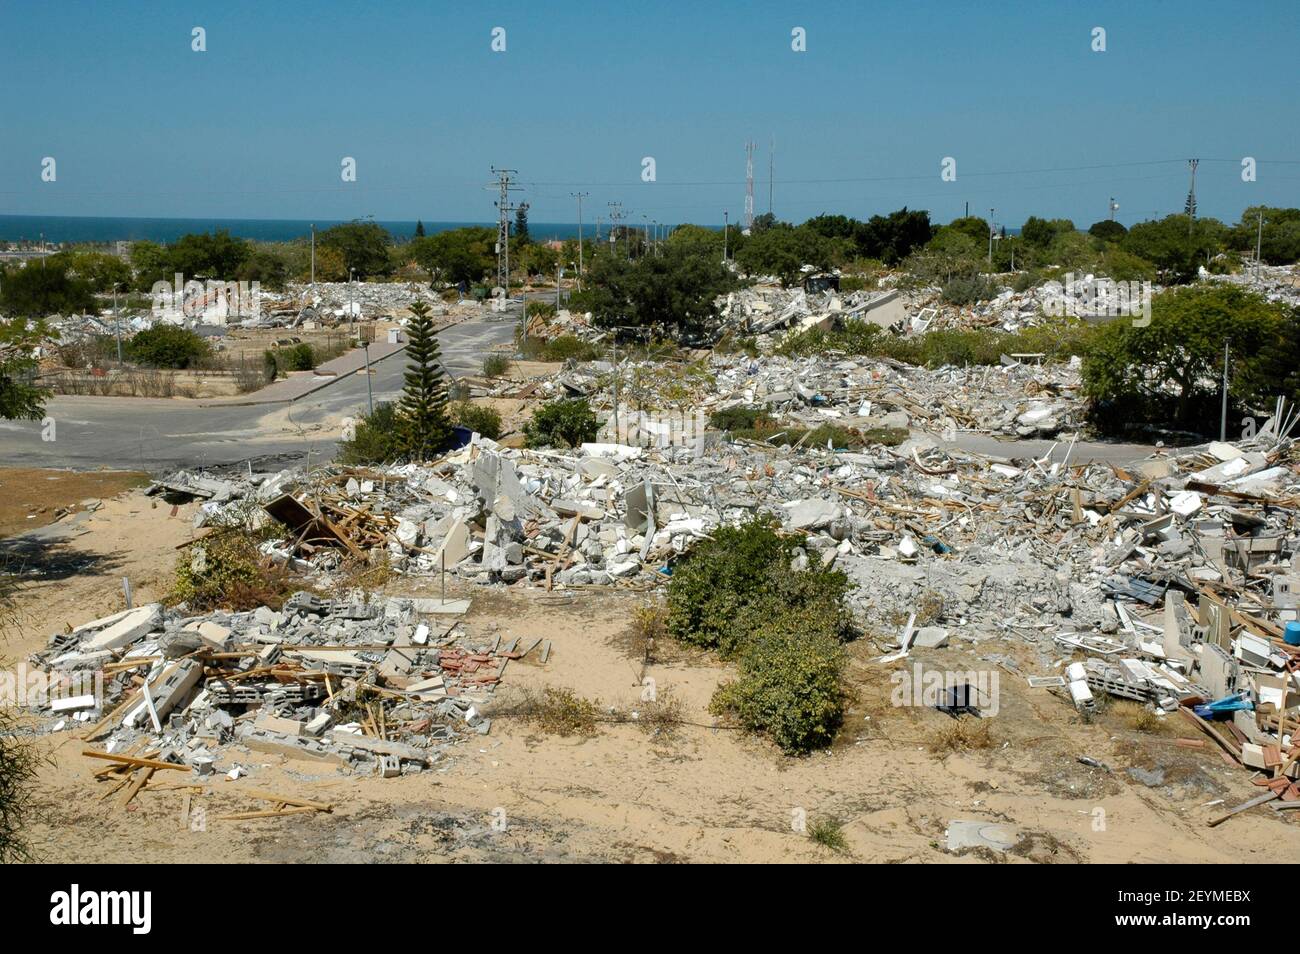 Mounds of rubble of demolished houses in what used to be the Jewish settlement of Neve Dekalim in Gaza Strip on 06 September 2005. Israel completed the evacuation of all 8,000 Jewish settlers from Gaza and several hundred more from four enclaves in the northern West Bank, after nearly 40 years of occupation. Stock Photo